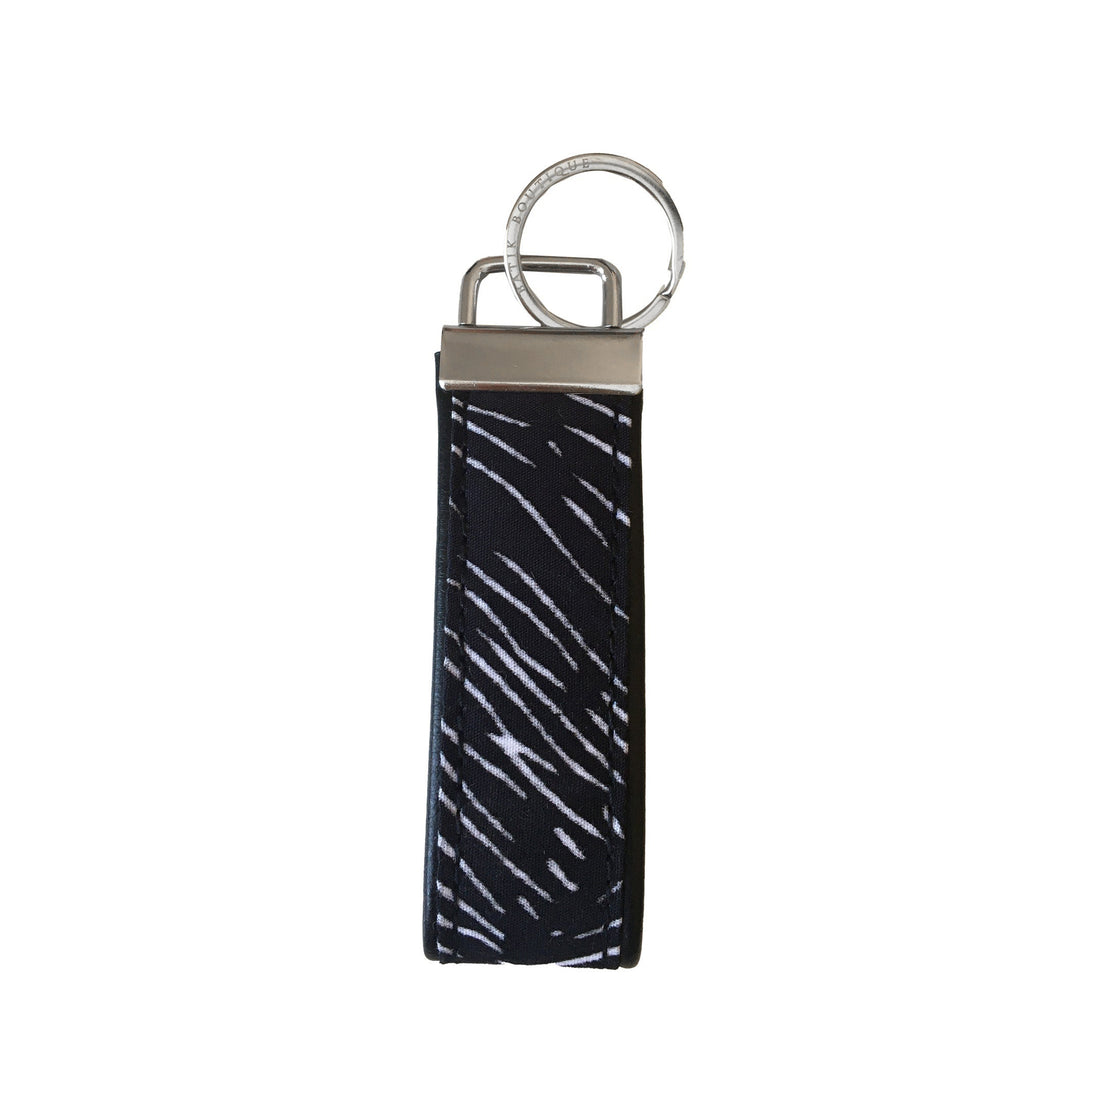 A frontside photo of batik key fob in black driftwood pattern on a white color background